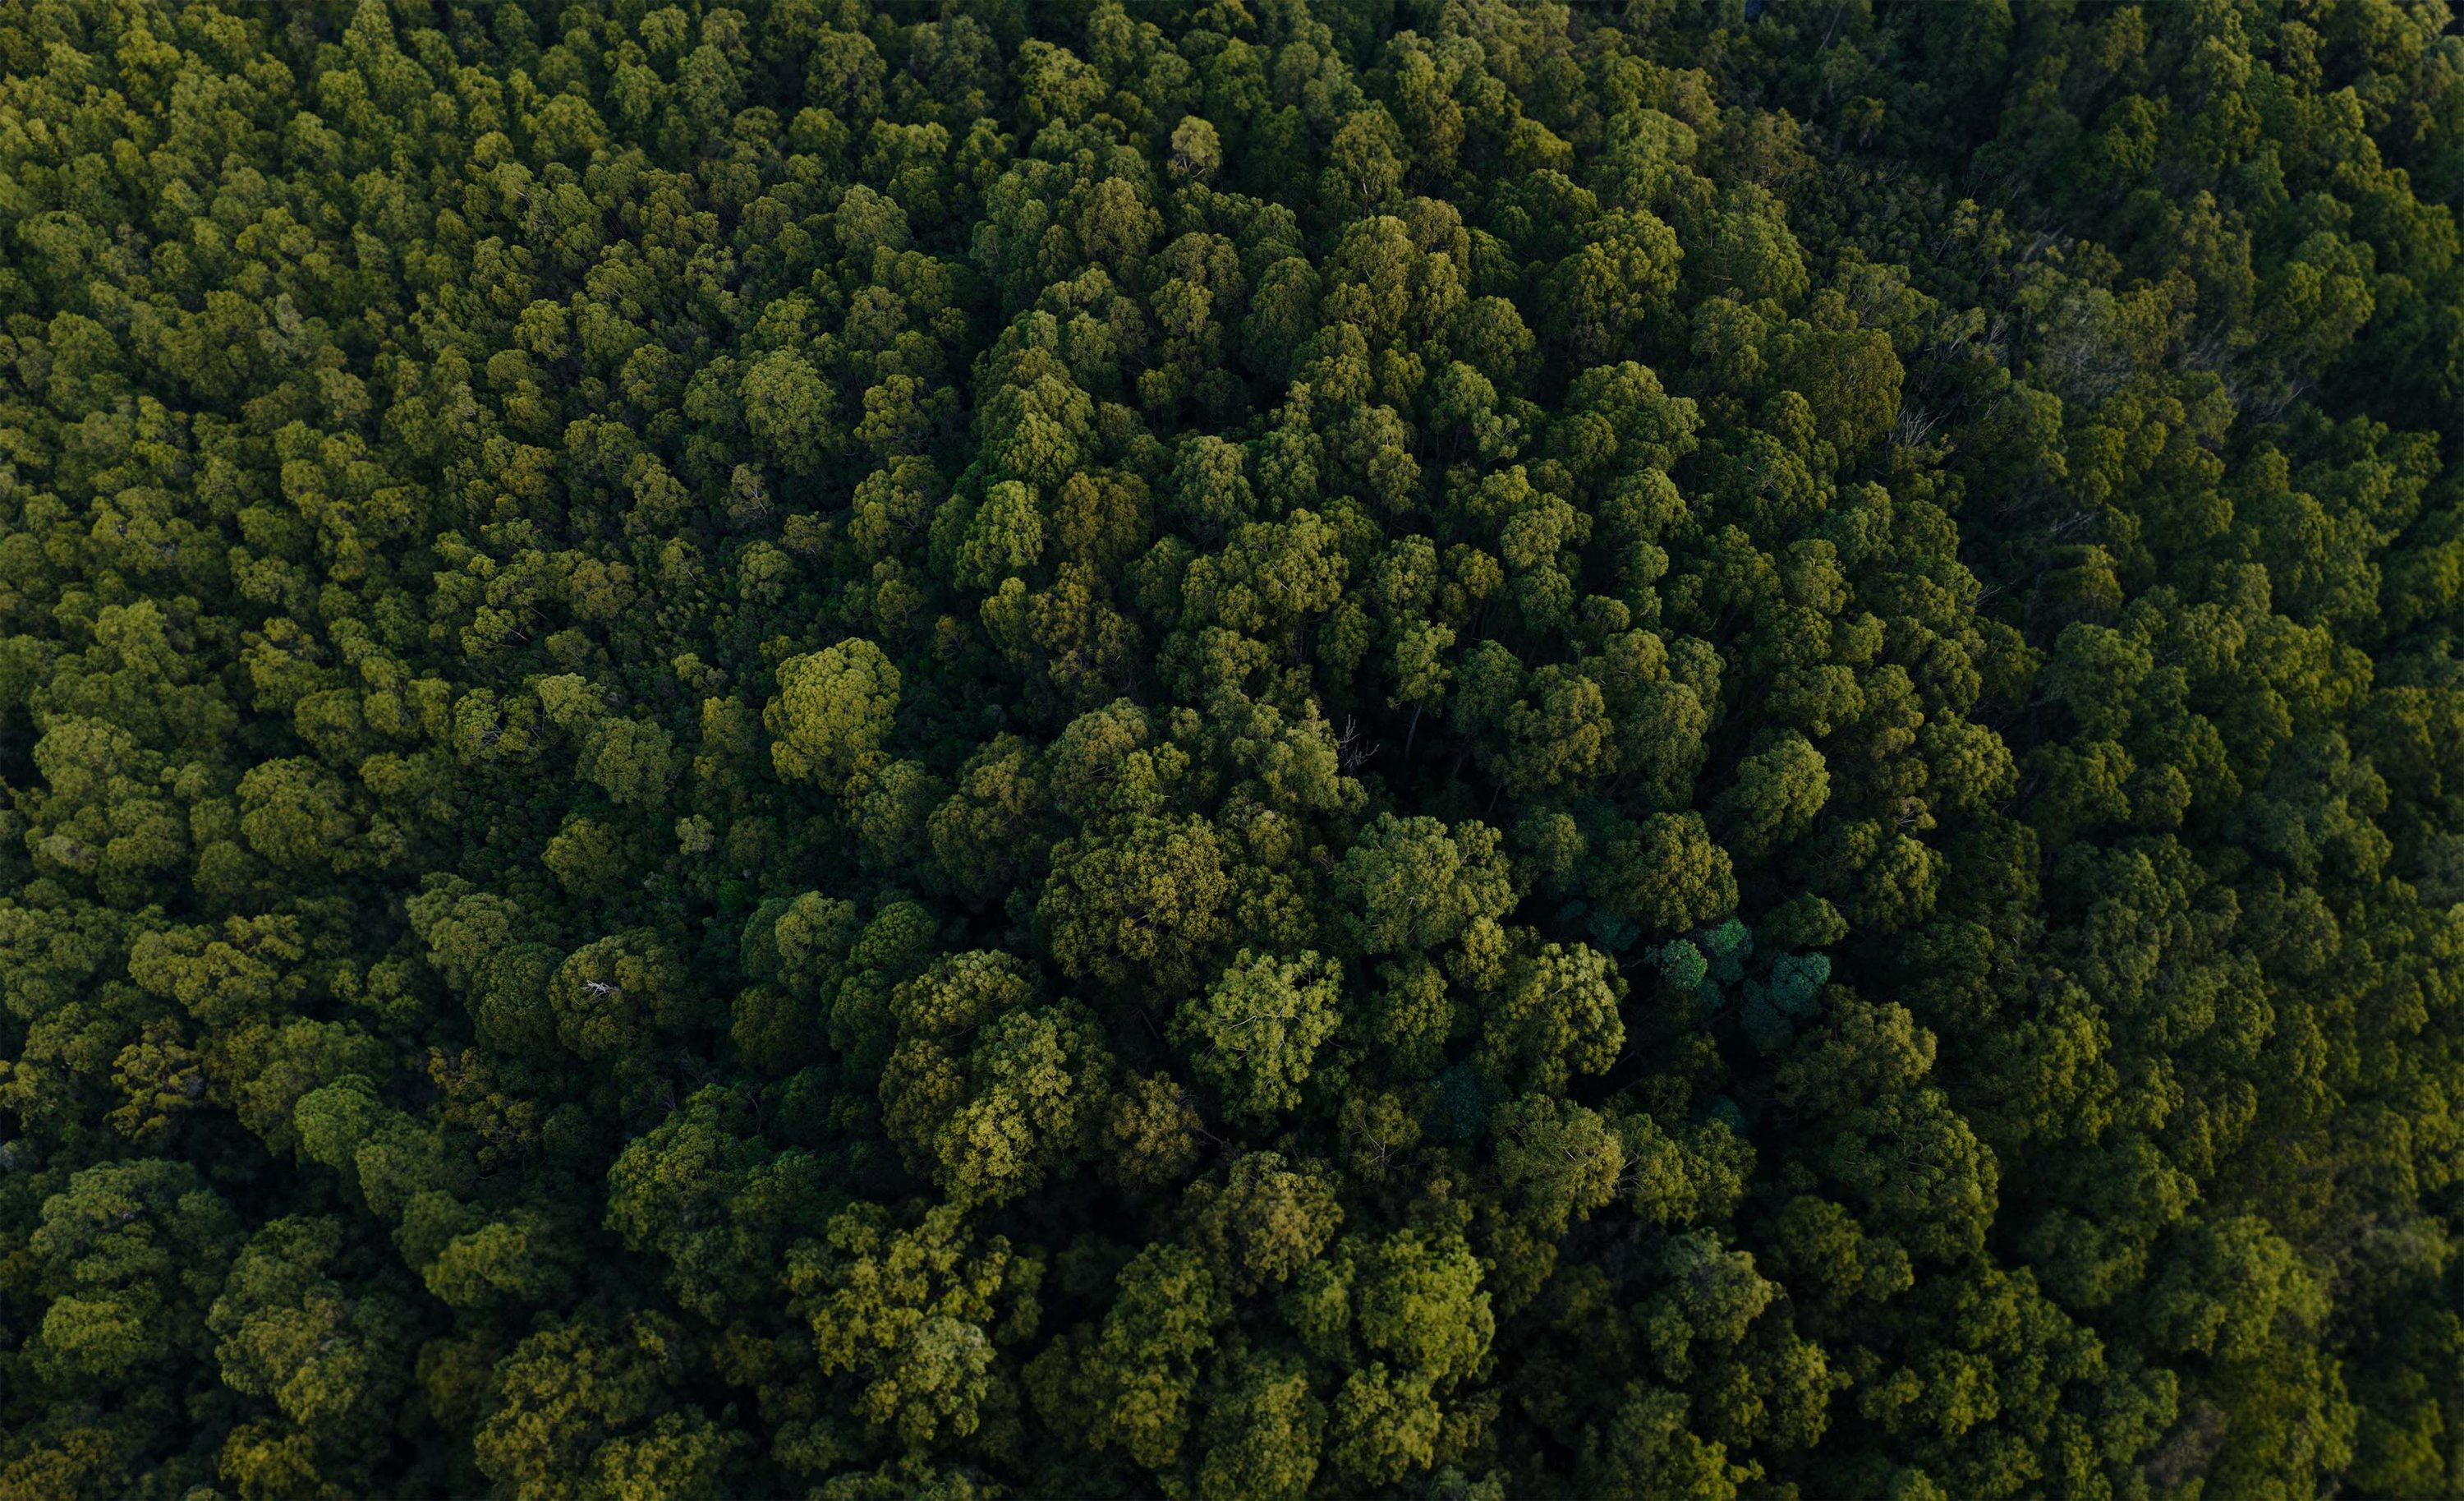 An aerial view of a dense forest with lush green trees of varying shades.